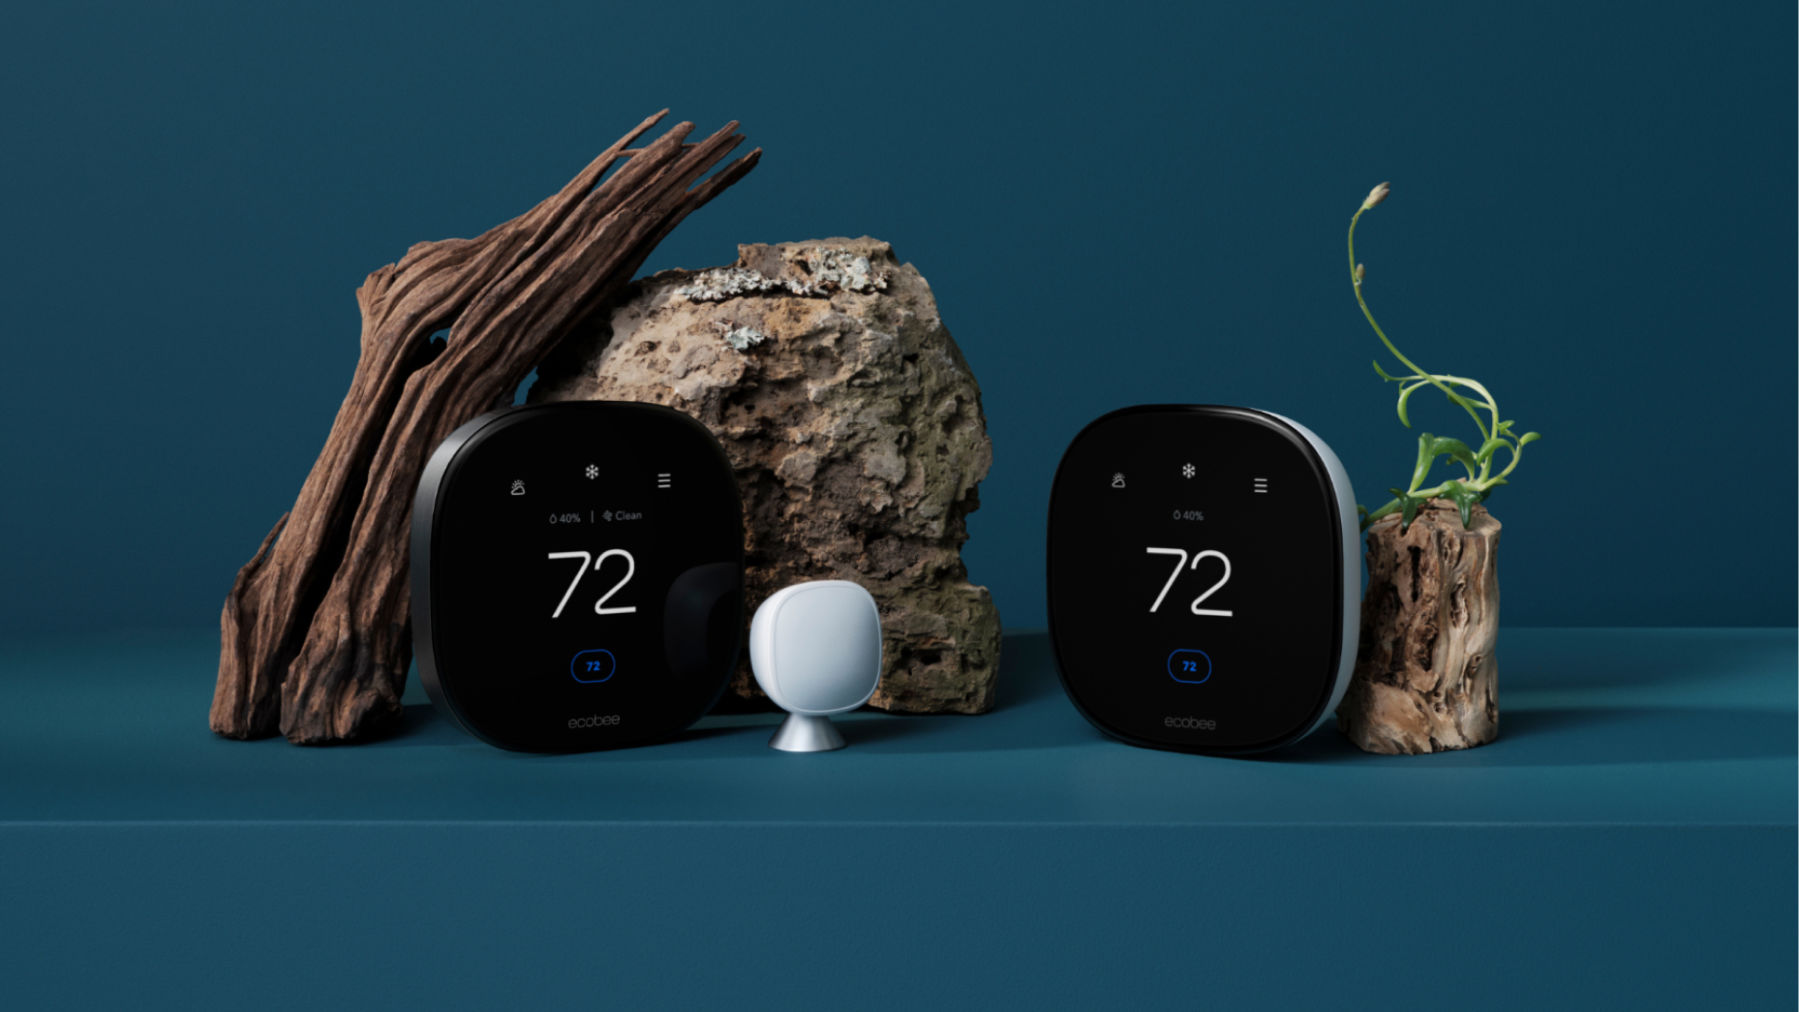 ecobee Smart Thermostat Premium and Smart Thermostat Enhanced in front of a blue background.